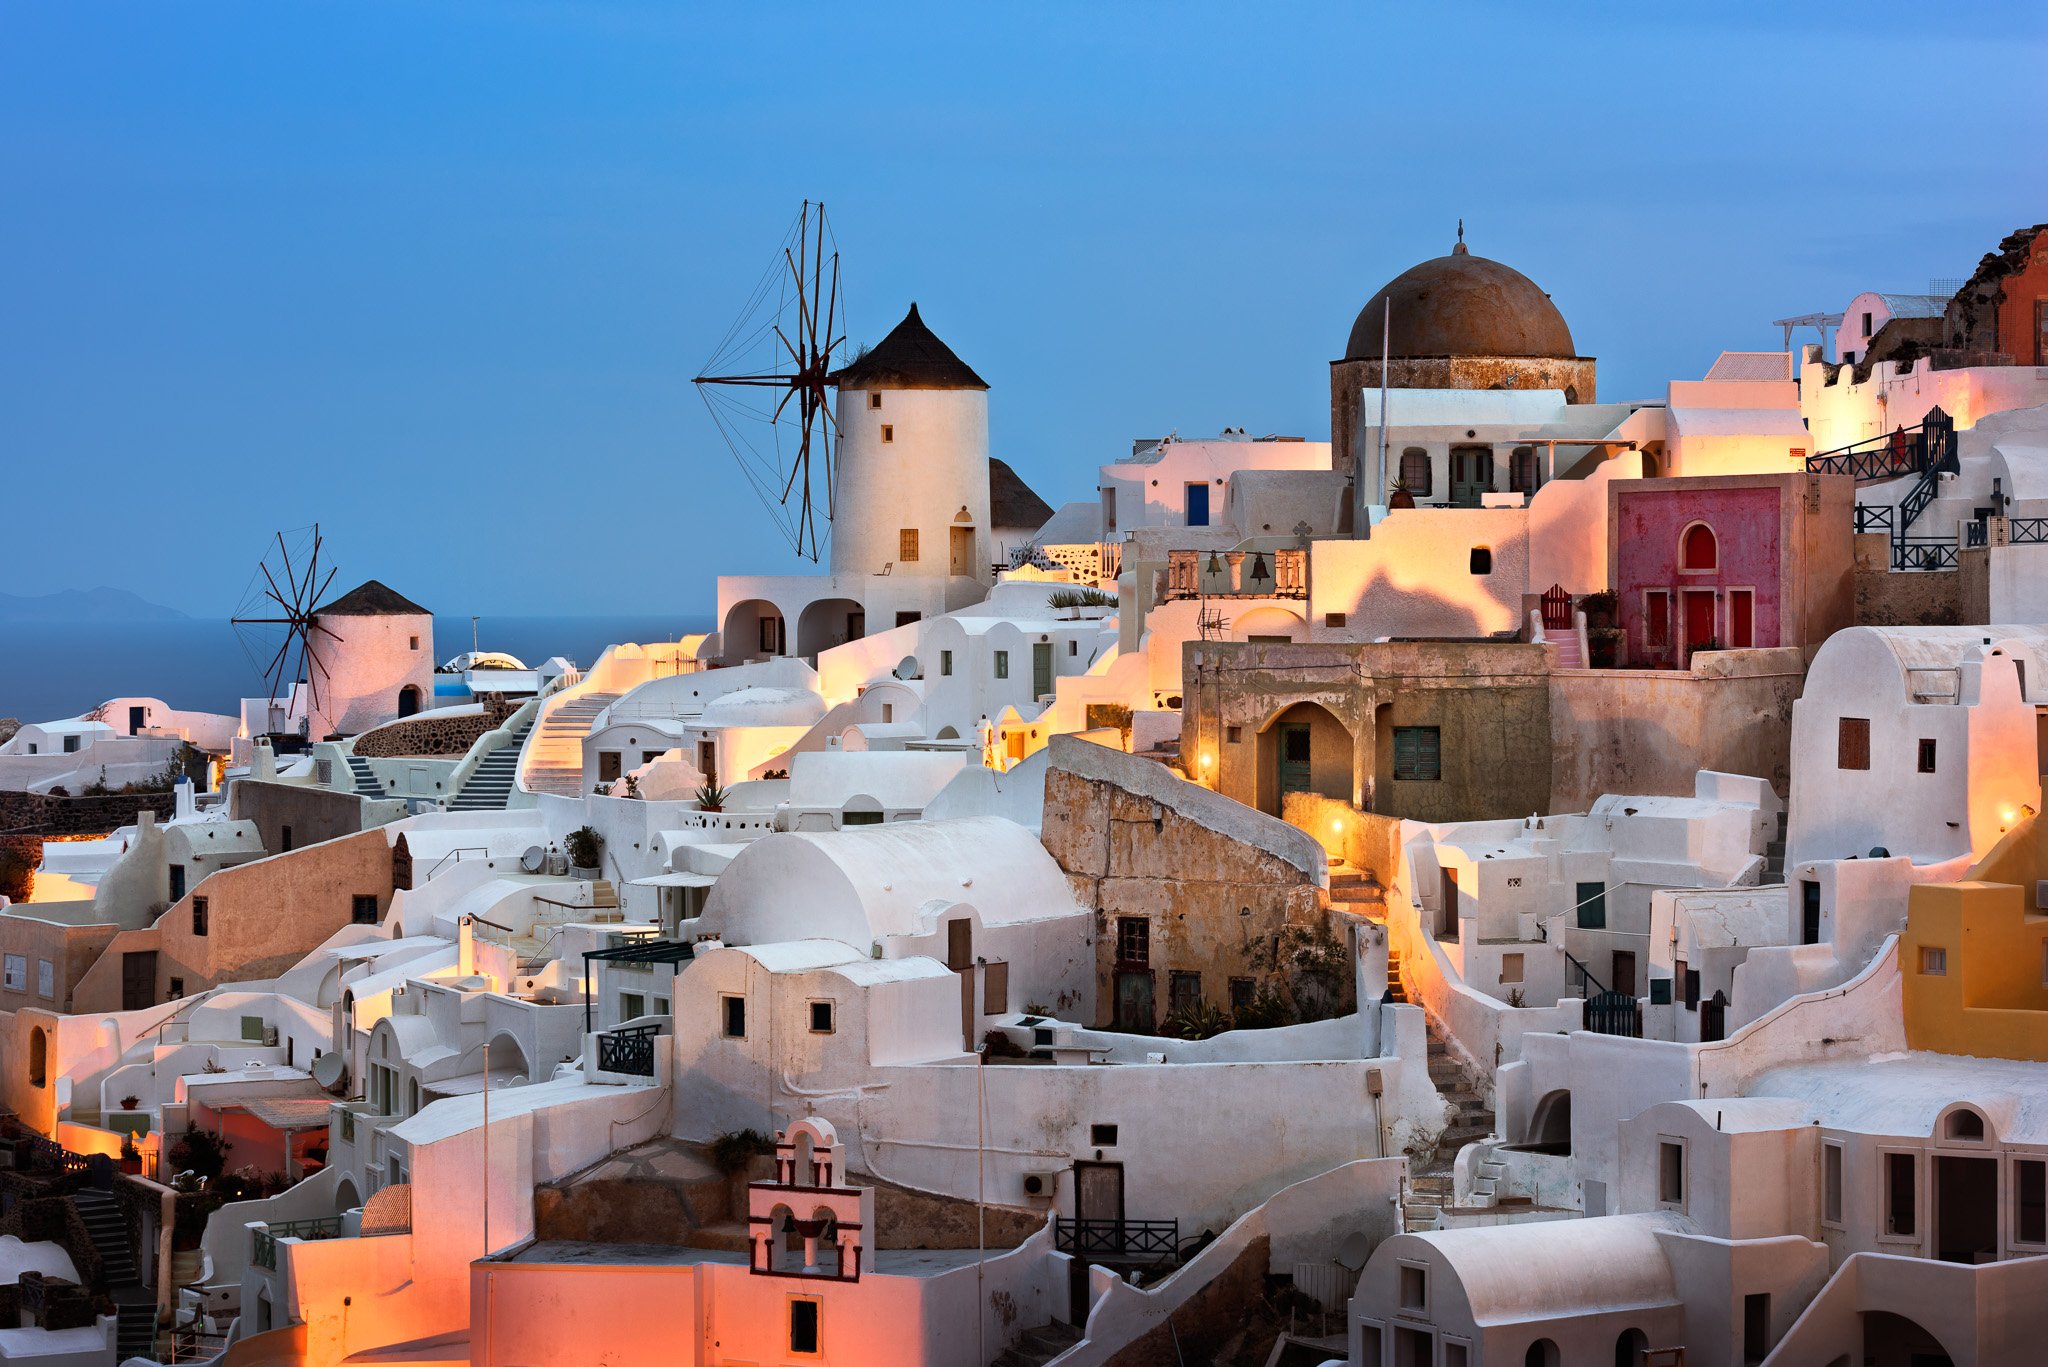 aegean, architecture, beautiful, blue, building, caldera, church, city, cityscape, cyclades, dawn, dome, europe, famous, greece, greek, hellas, holiday, hotel, house, iconic, illuminated, island, landmark, landscape, lights, mediterranean, mill, morning, , Andrey Omelyanchuk